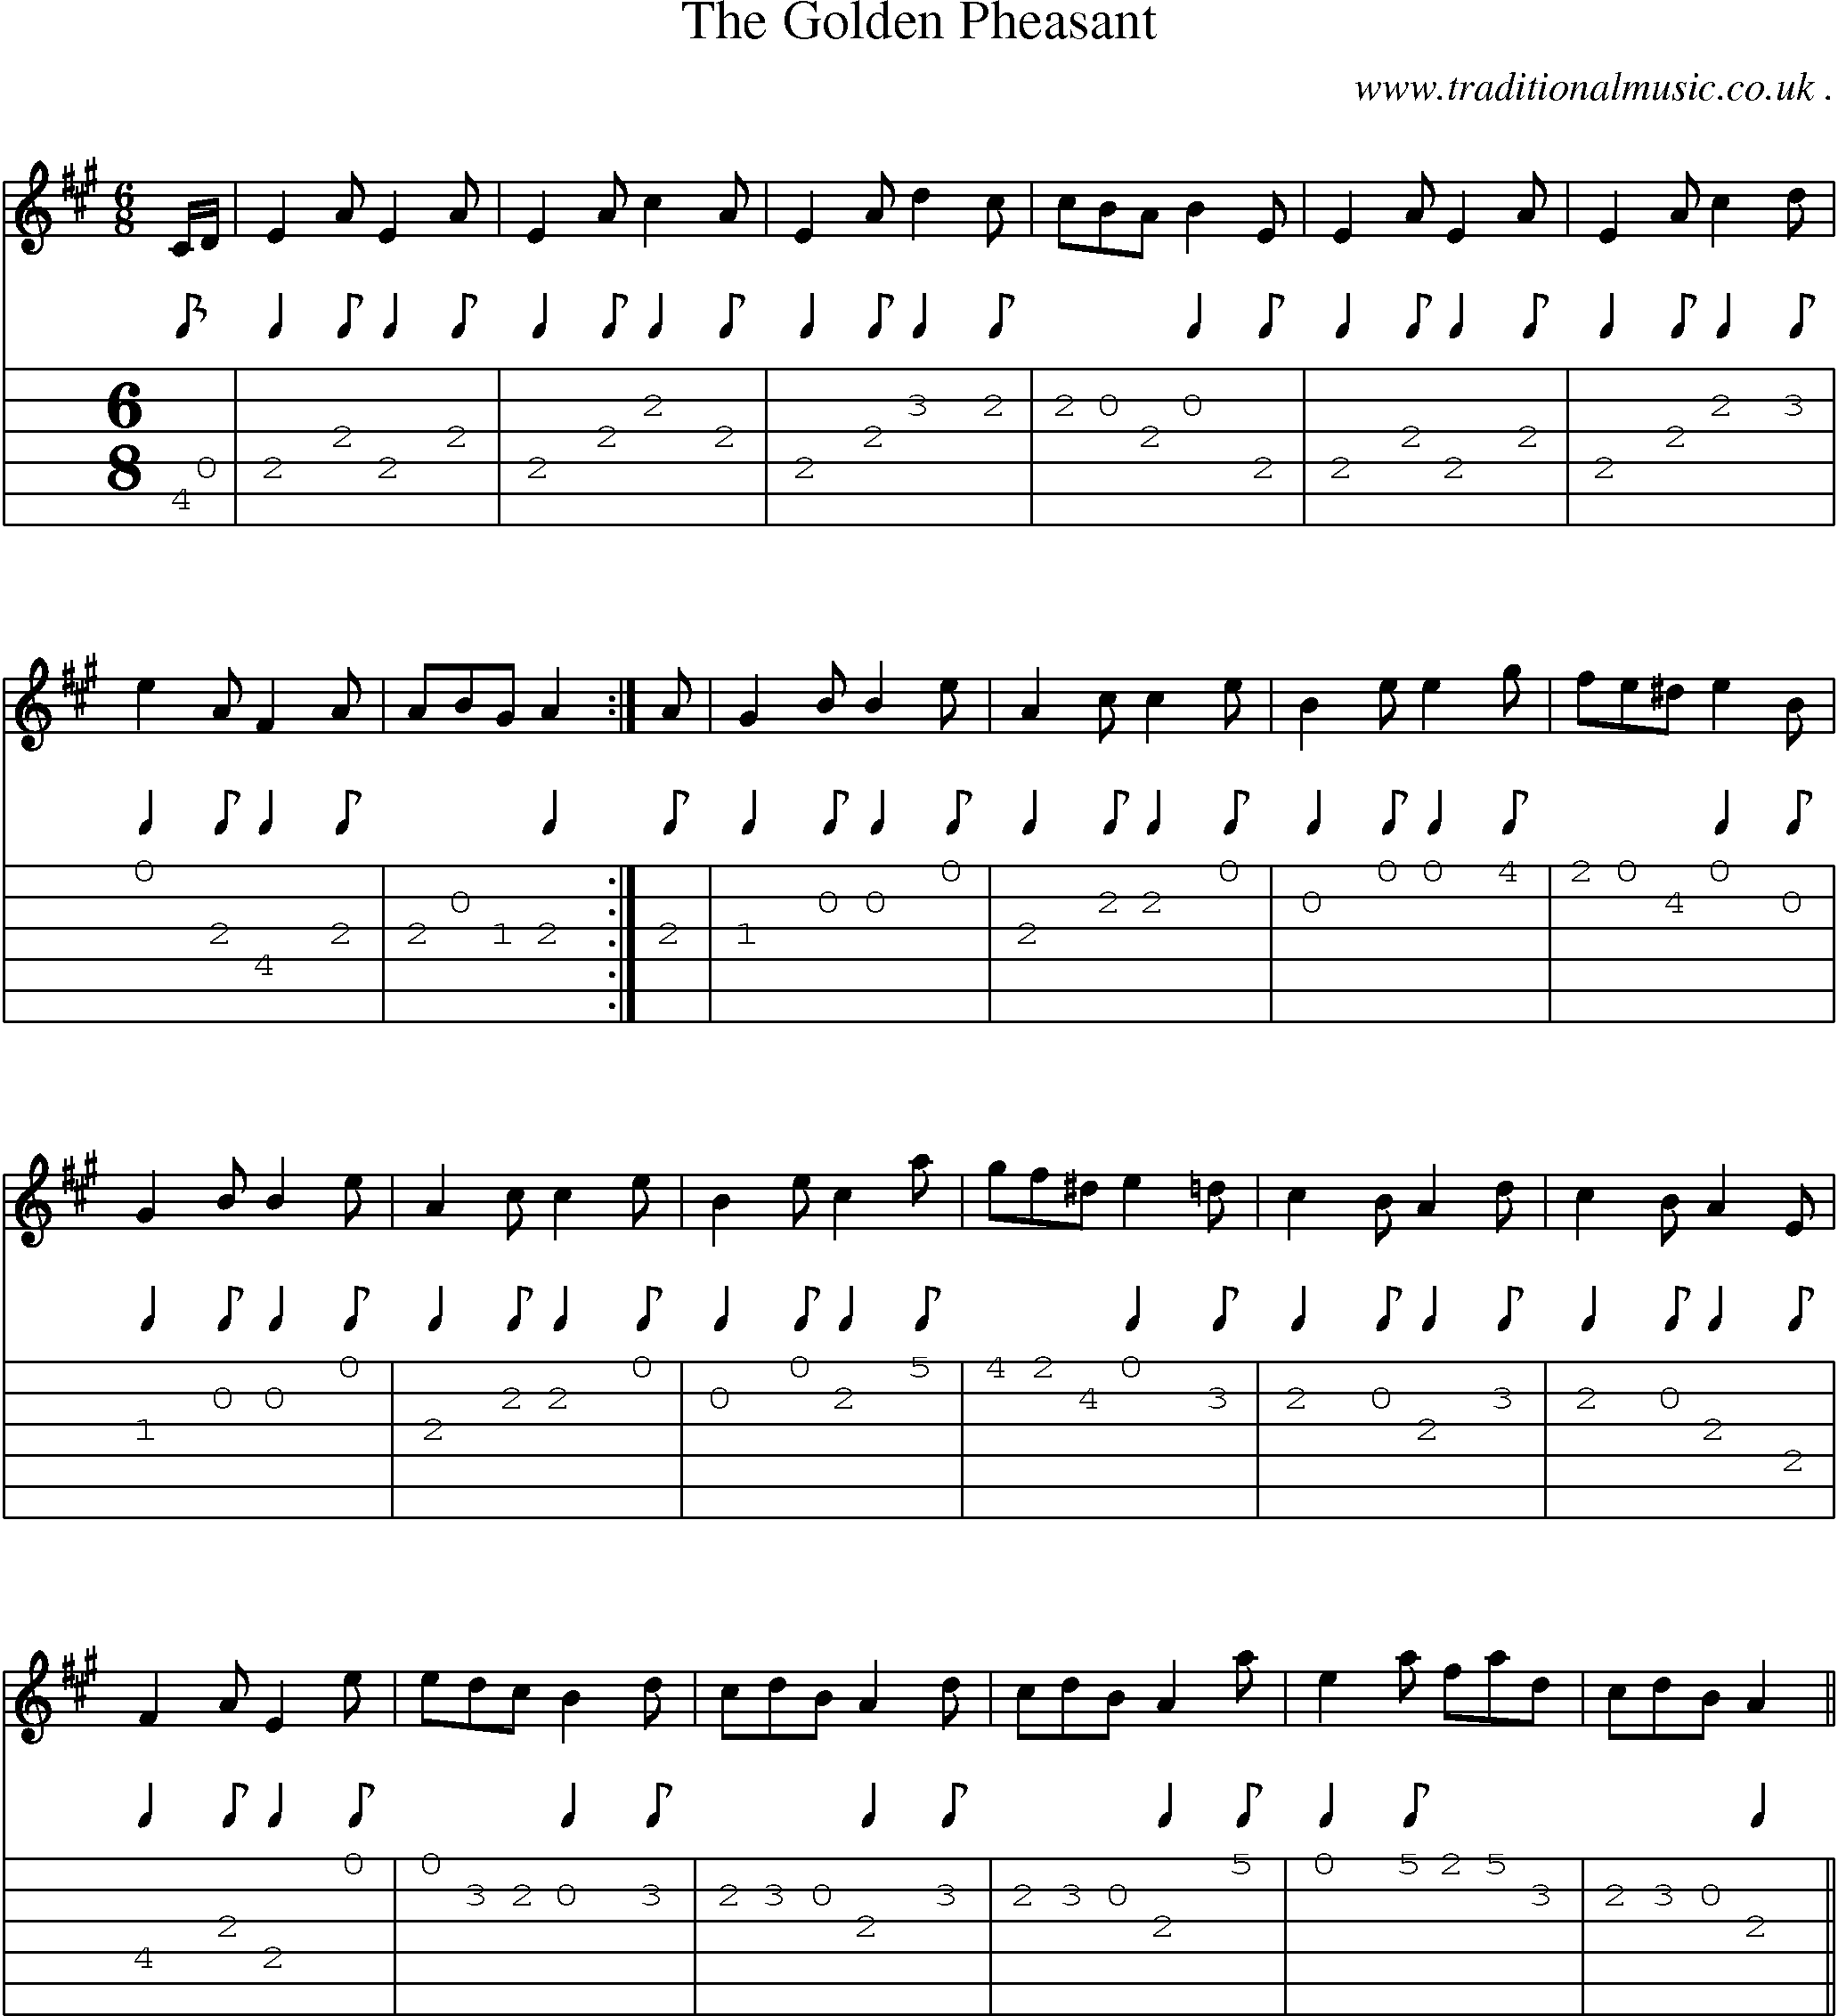 Sheet-Music and Guitar Tabs for The Golden Pheasant